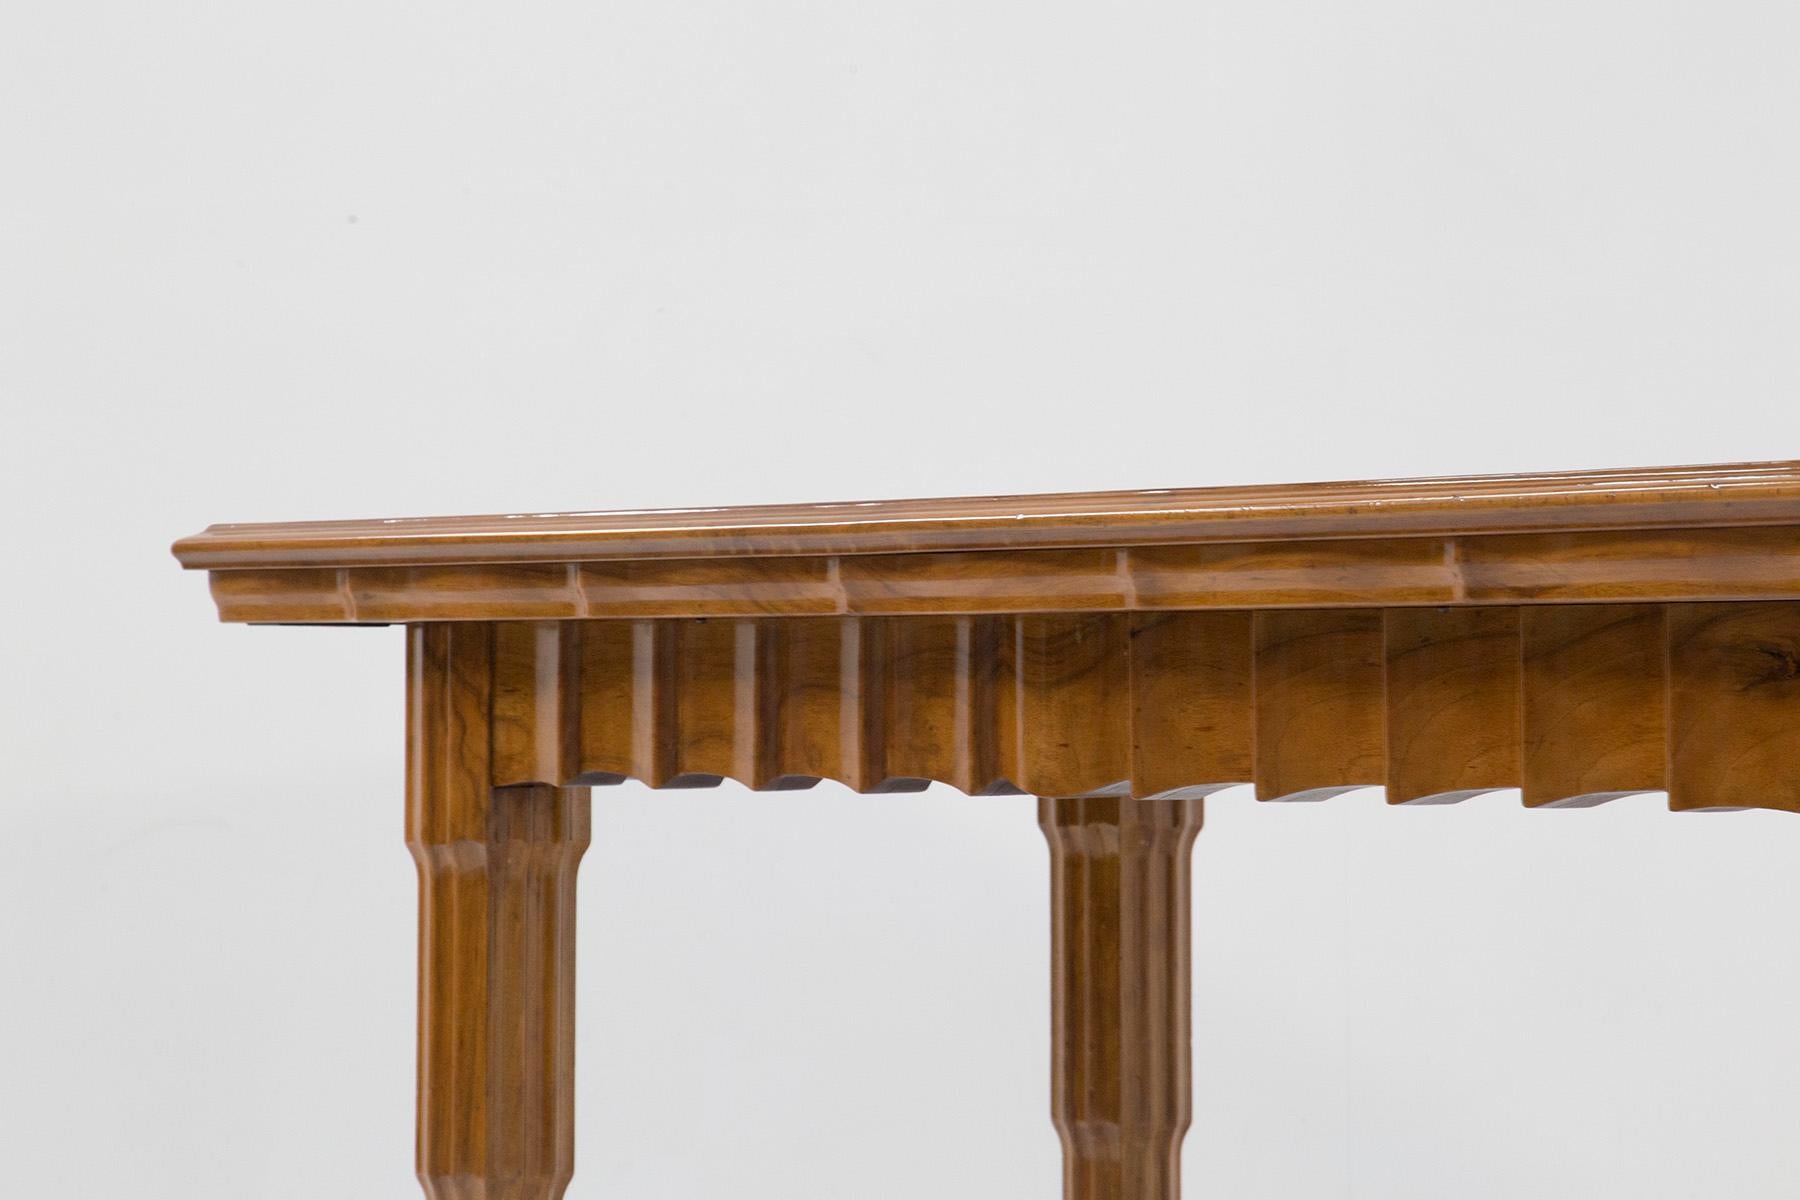 Elegant dining table by Paul Follot Attributed, of French manufacture from the French Art Deco period. The table is entirely made of wood. The table is made with a magnificent technique and the great craftsmanship in the woodwork is denoted. The